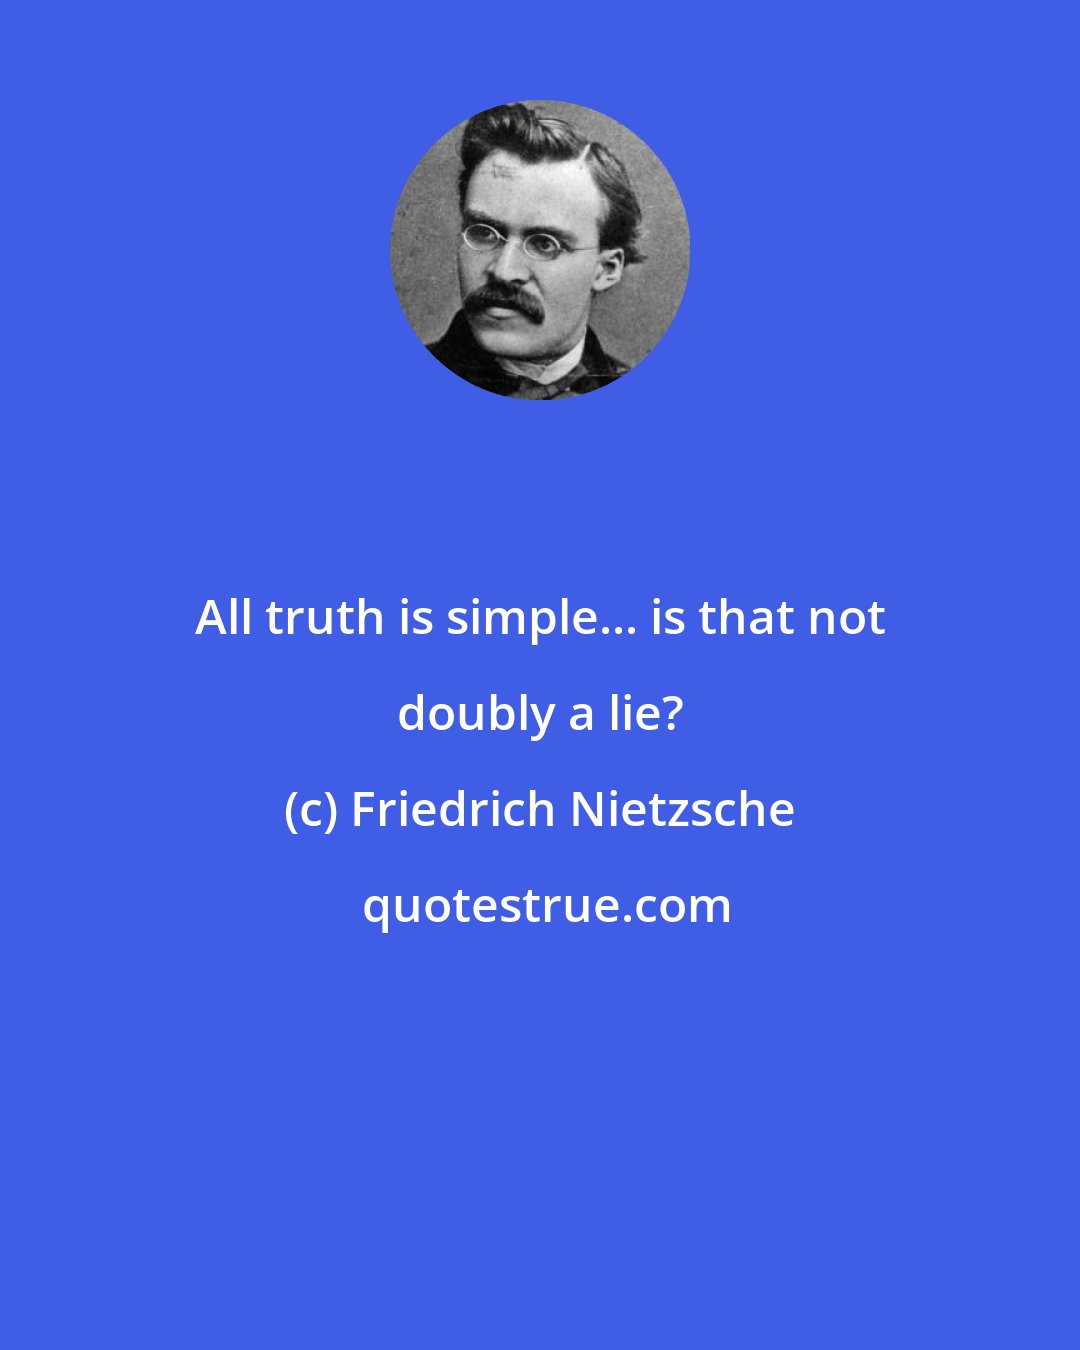 Friedrich Nietzsche: All truth is simple... is that not doubly a lie?